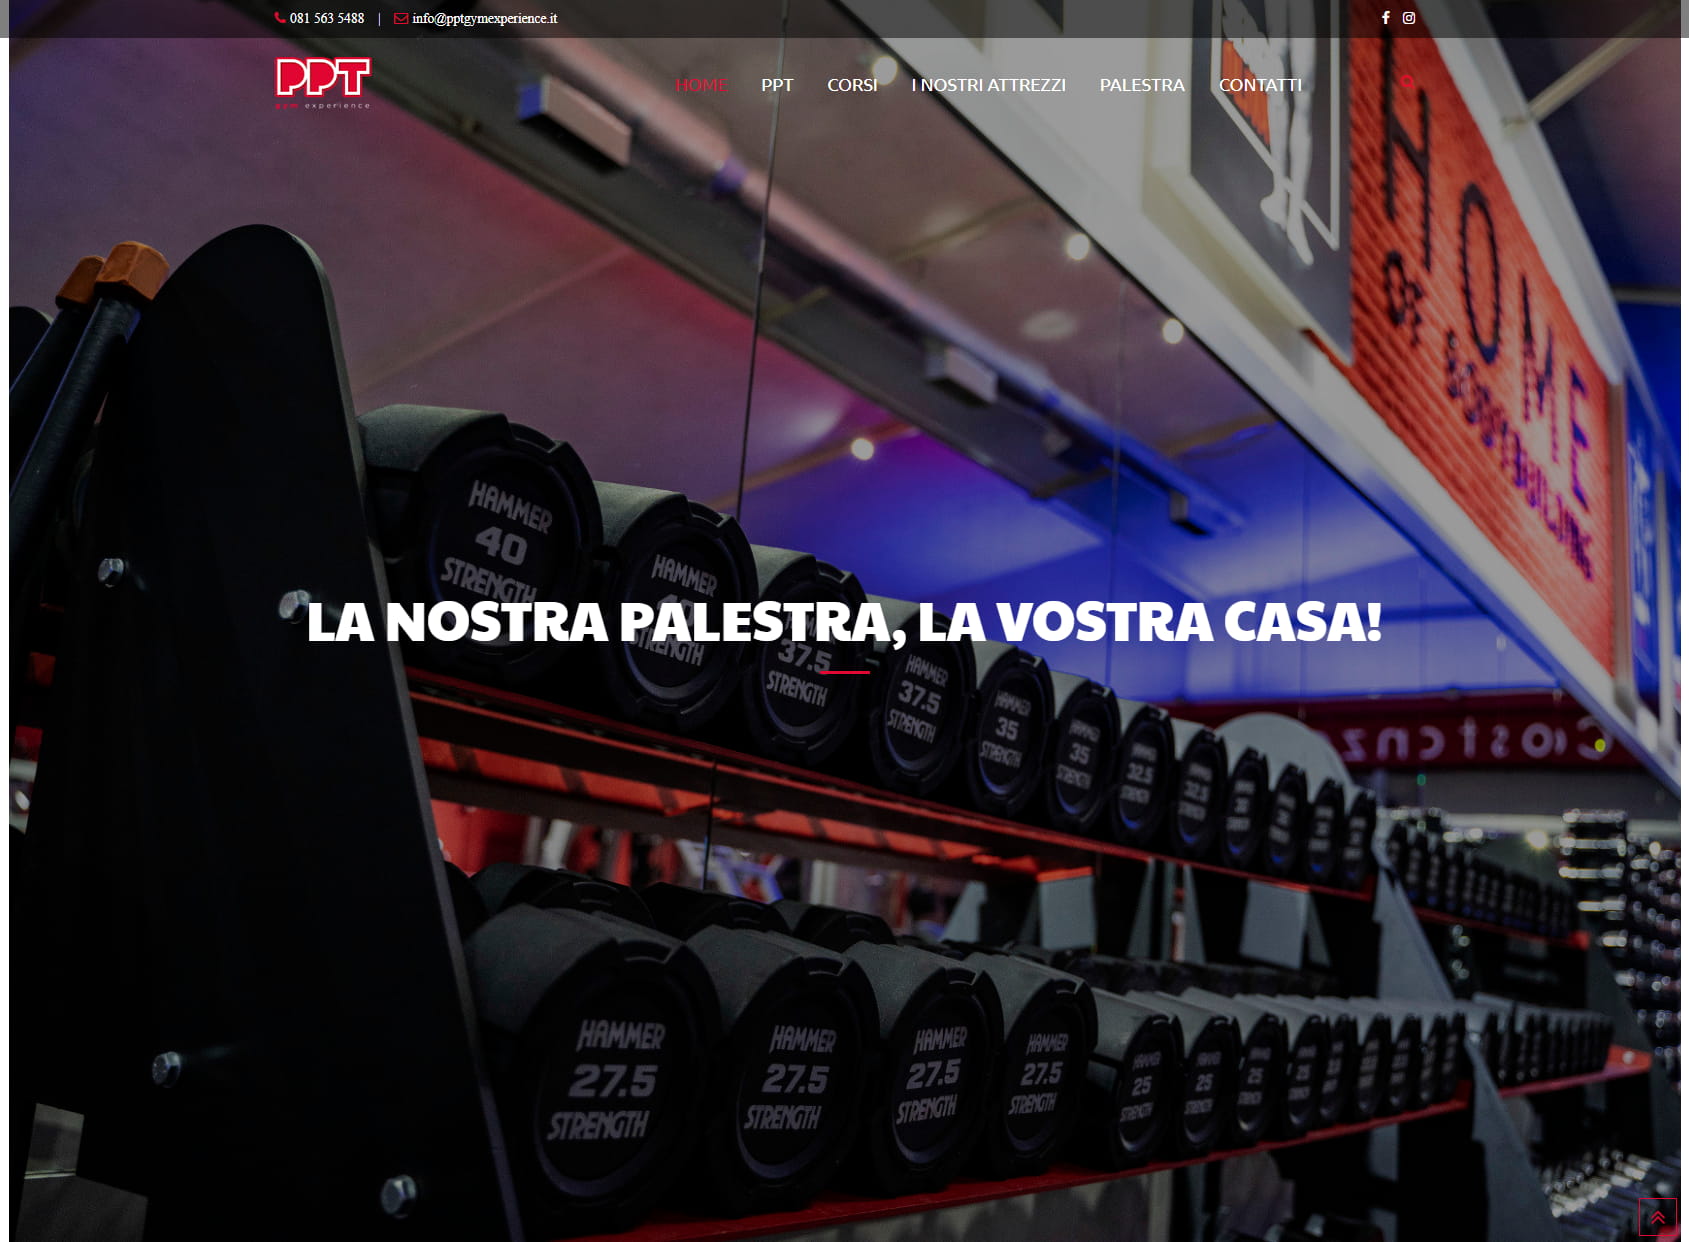 PPT FITNESS GYM